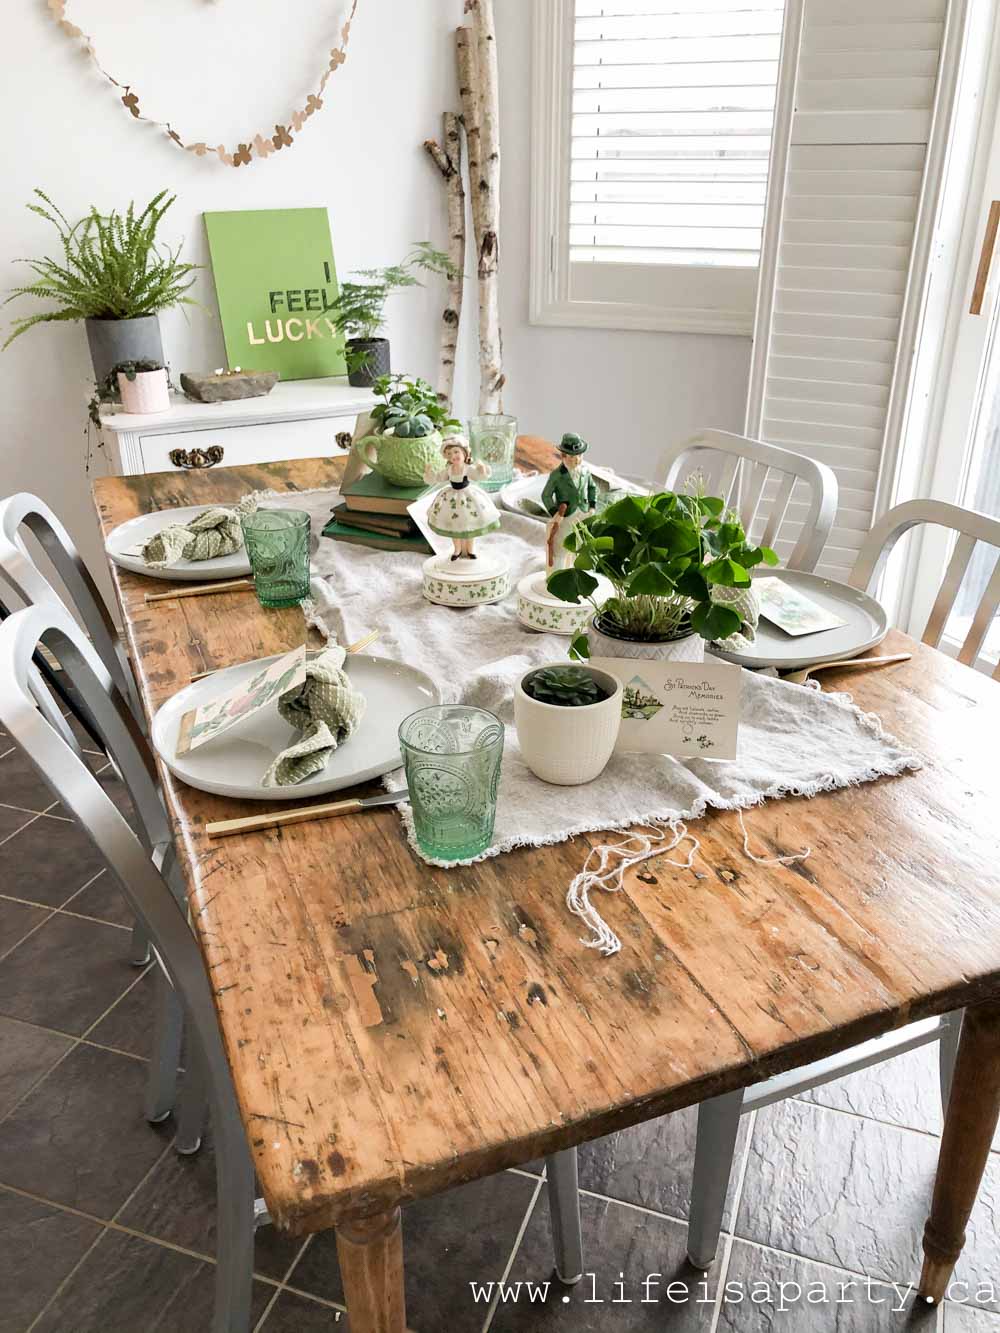 St. Patrick's Day Table: a mix of vintage and modern touches with lots of green for the perfect St. Patrick's Day table decorations.